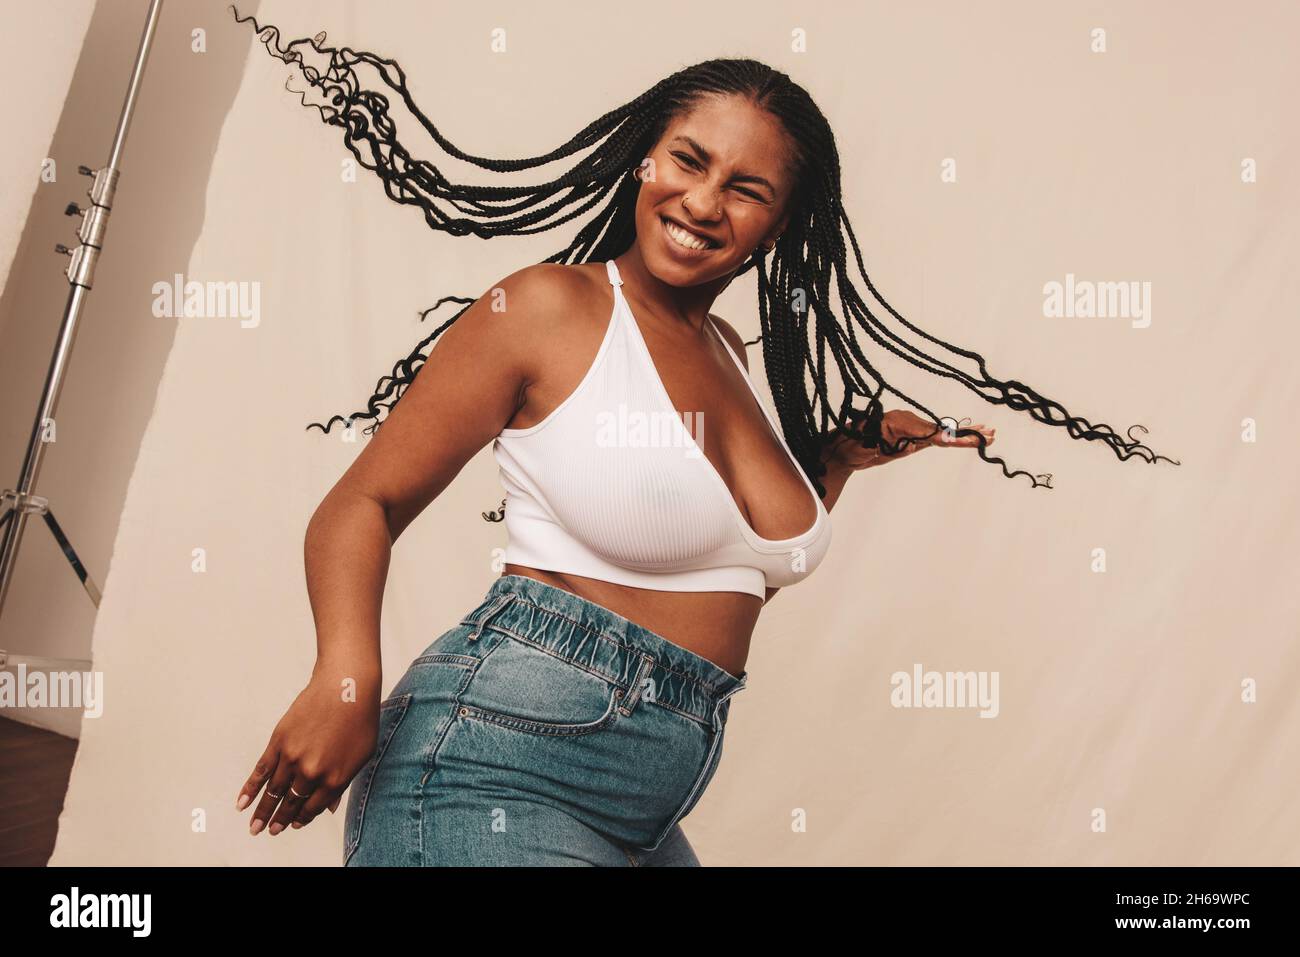 Cheerful young woman celebrating being natural in a studio. Happy young woman smiling and dancing while wearing denim jeans and a bra in a studio. You Stock Photo